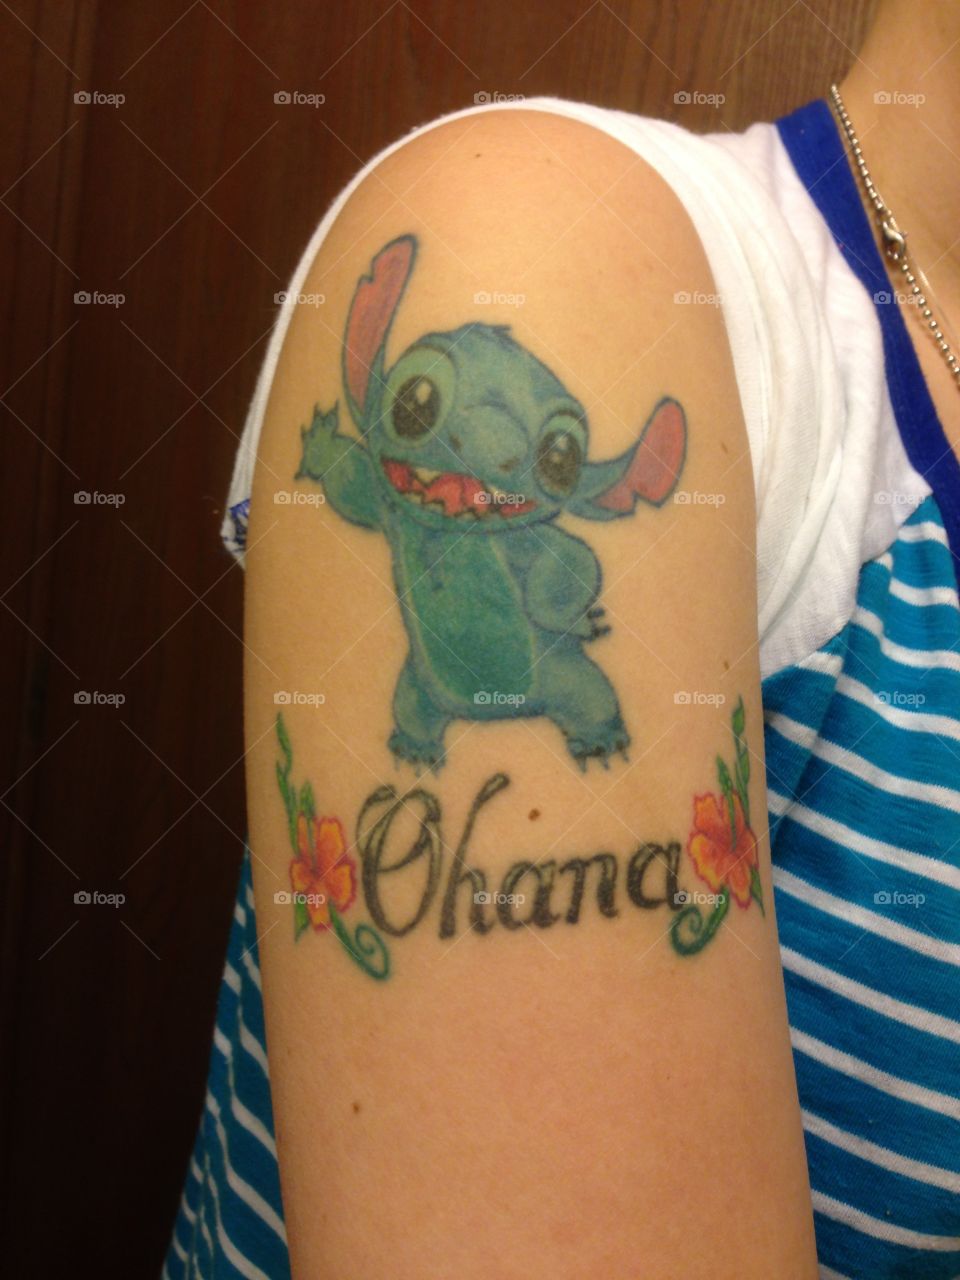 I got this tattoo in 2010 after I had gone through many years of kidney surgeries & finally had to have my kidney removed, my family was there every step of the way. I got Ohana because it means Family, and family is so special to me. The Disney Stitch movie was my favorite & because of what he says Ohana means. This tattoo means so much to me. It reminds of how much my family means to me and how much you need family. 